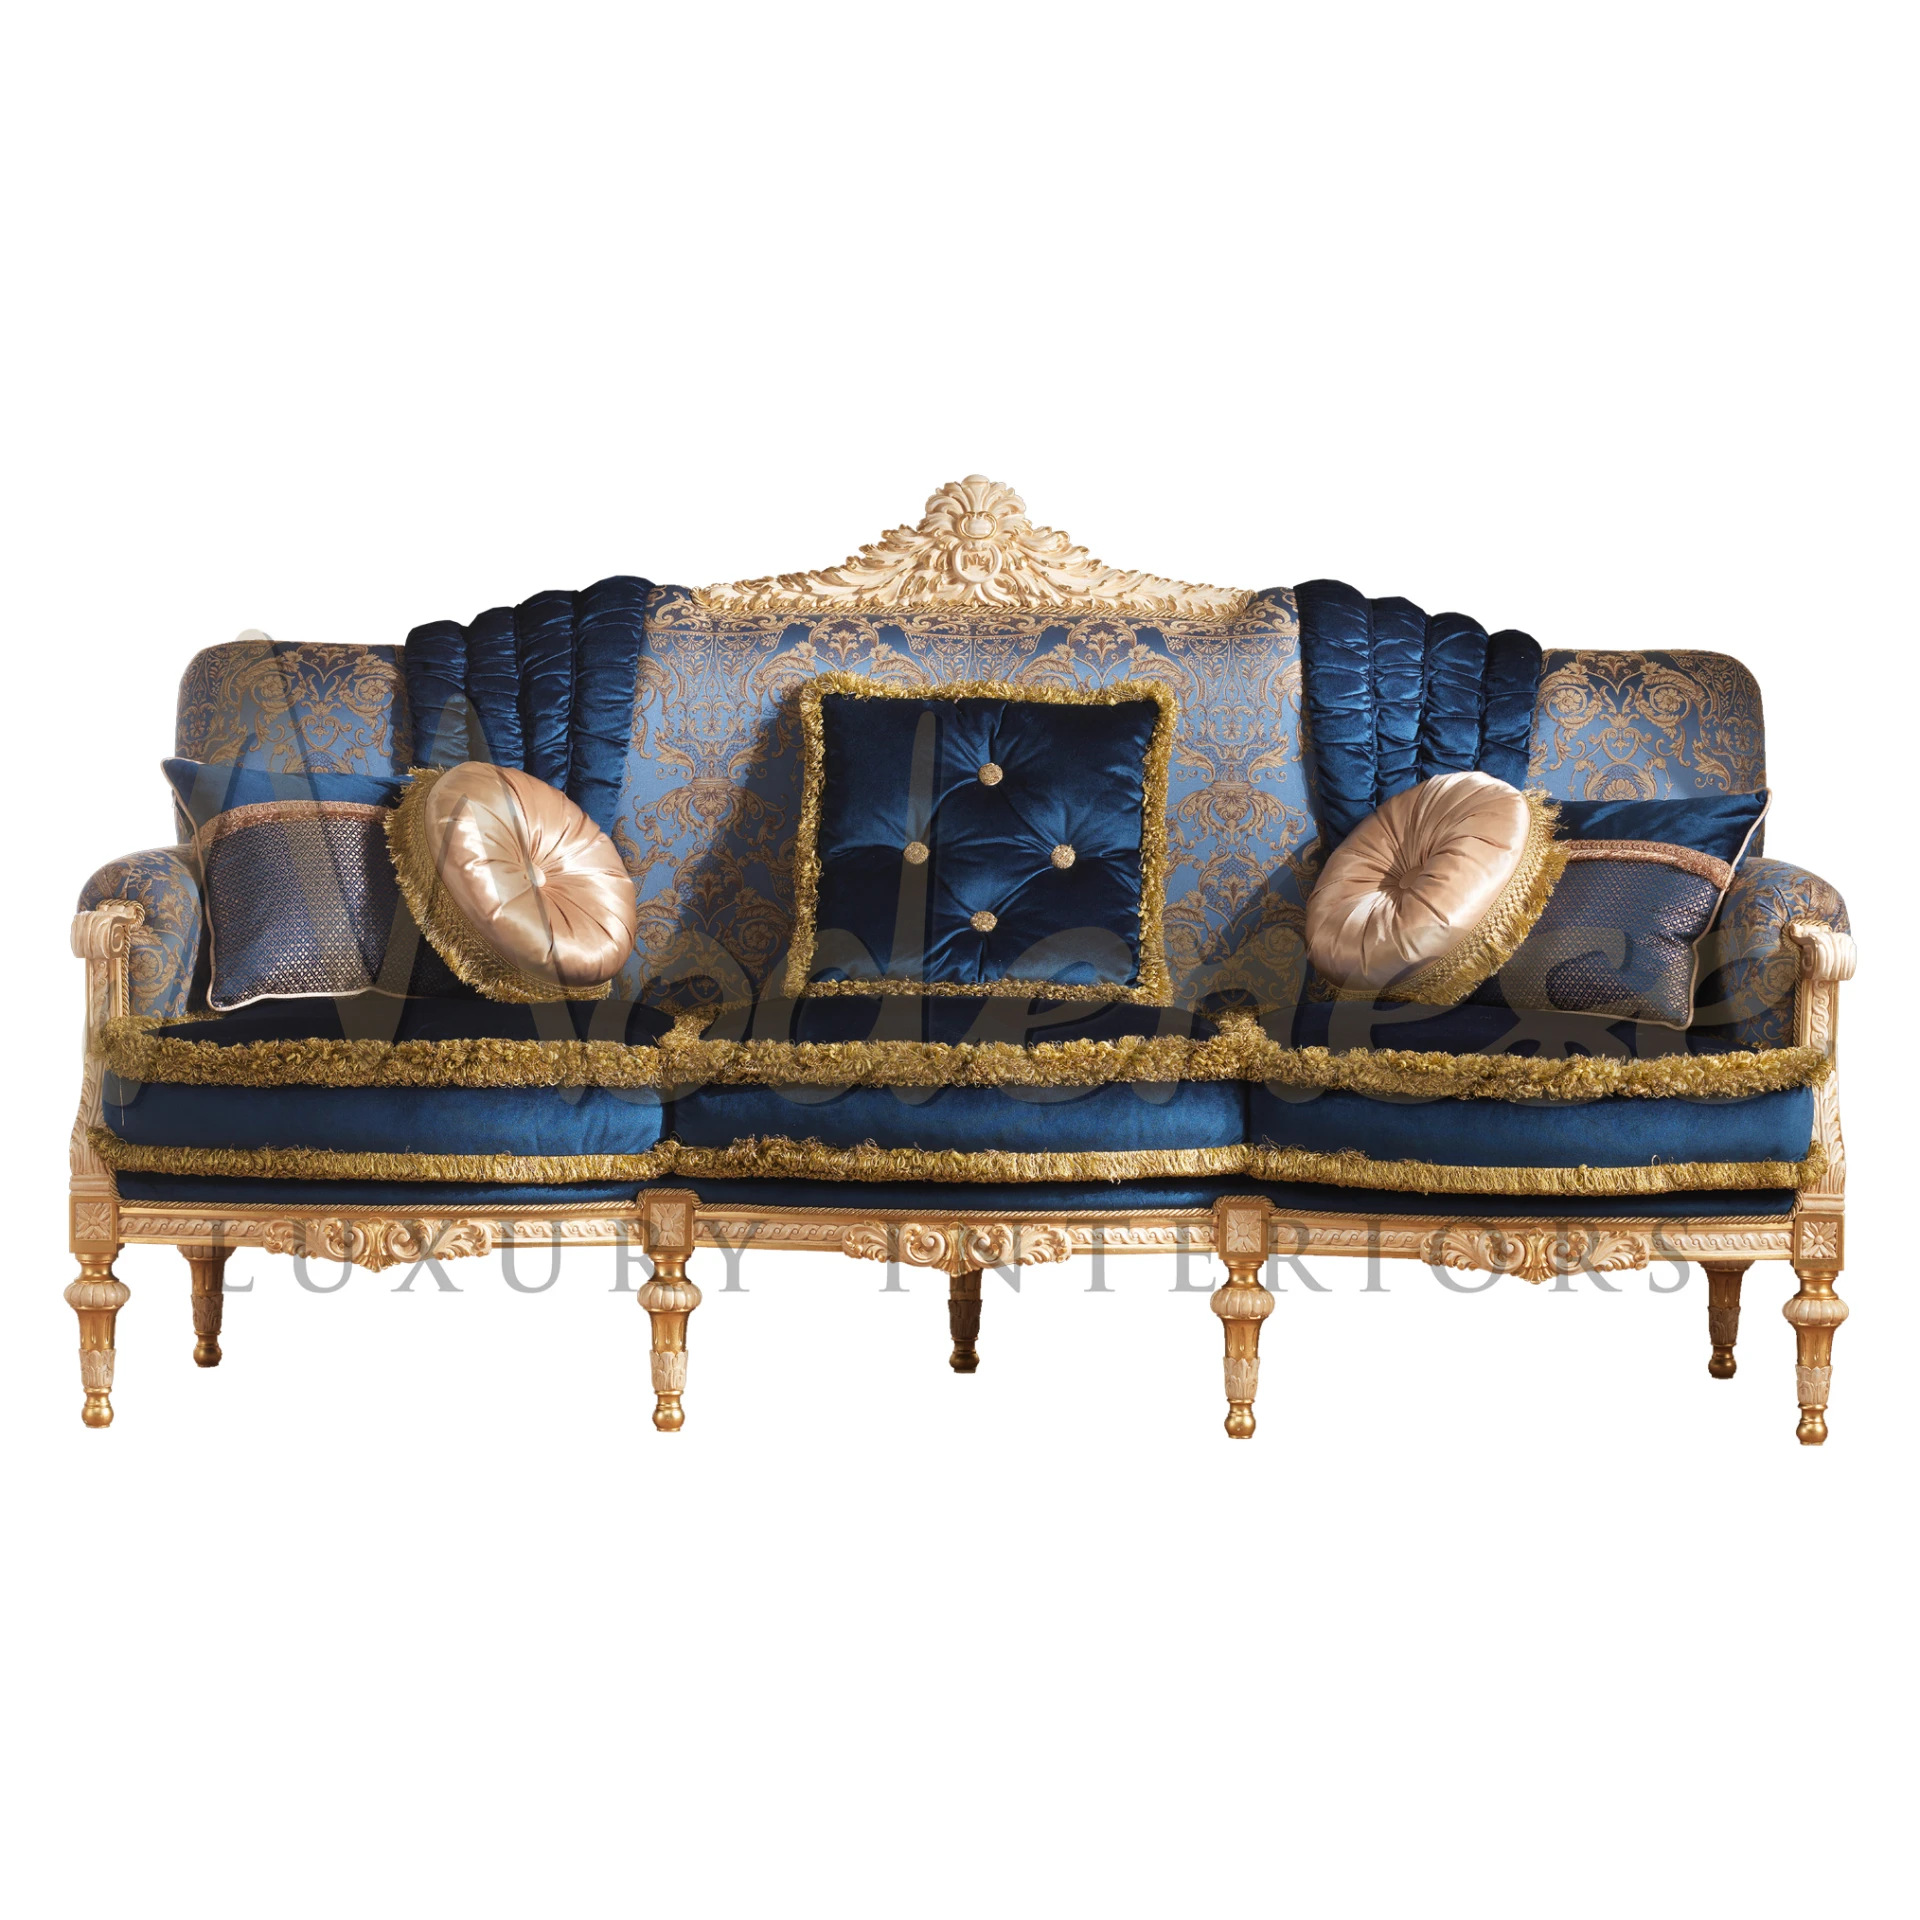 Its majestic sofa design, featuring exquisite hand-carved details and sumptuous blue upholstery, adds a touch of grandeur to any room. 